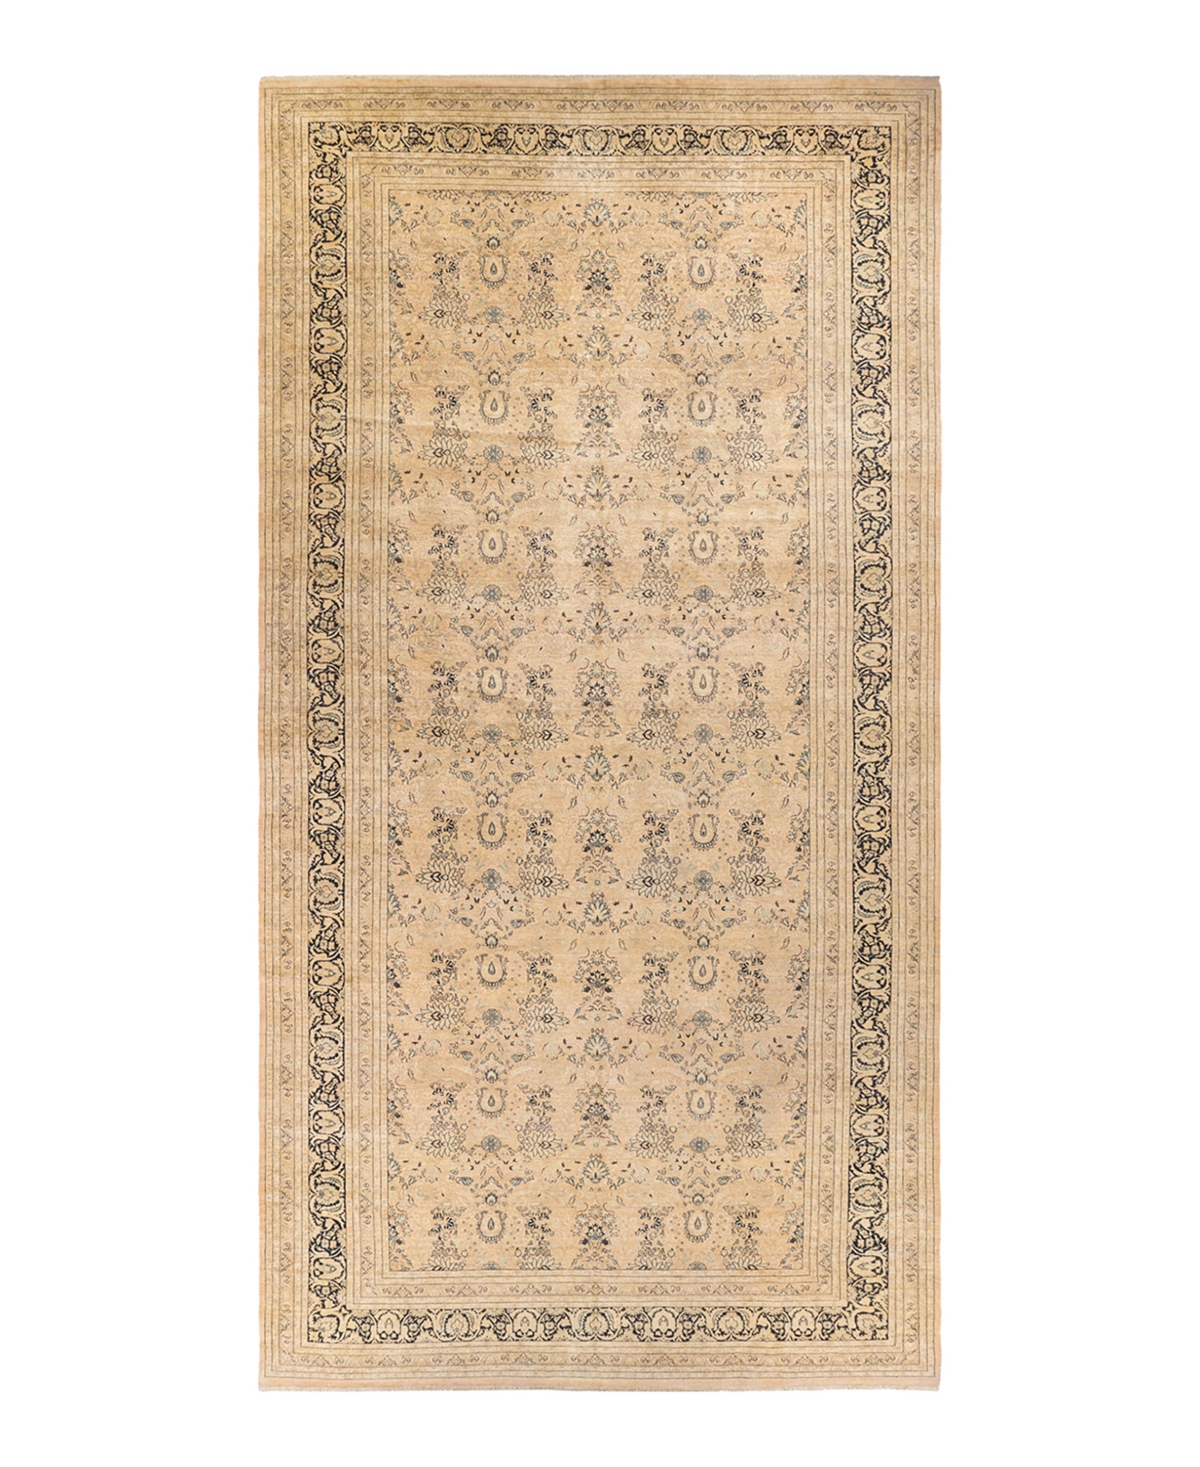 Closeout! Adorn Hand Woven Rugs Mogul M1165 9' x 18'10in Runner Area Rug - Beige